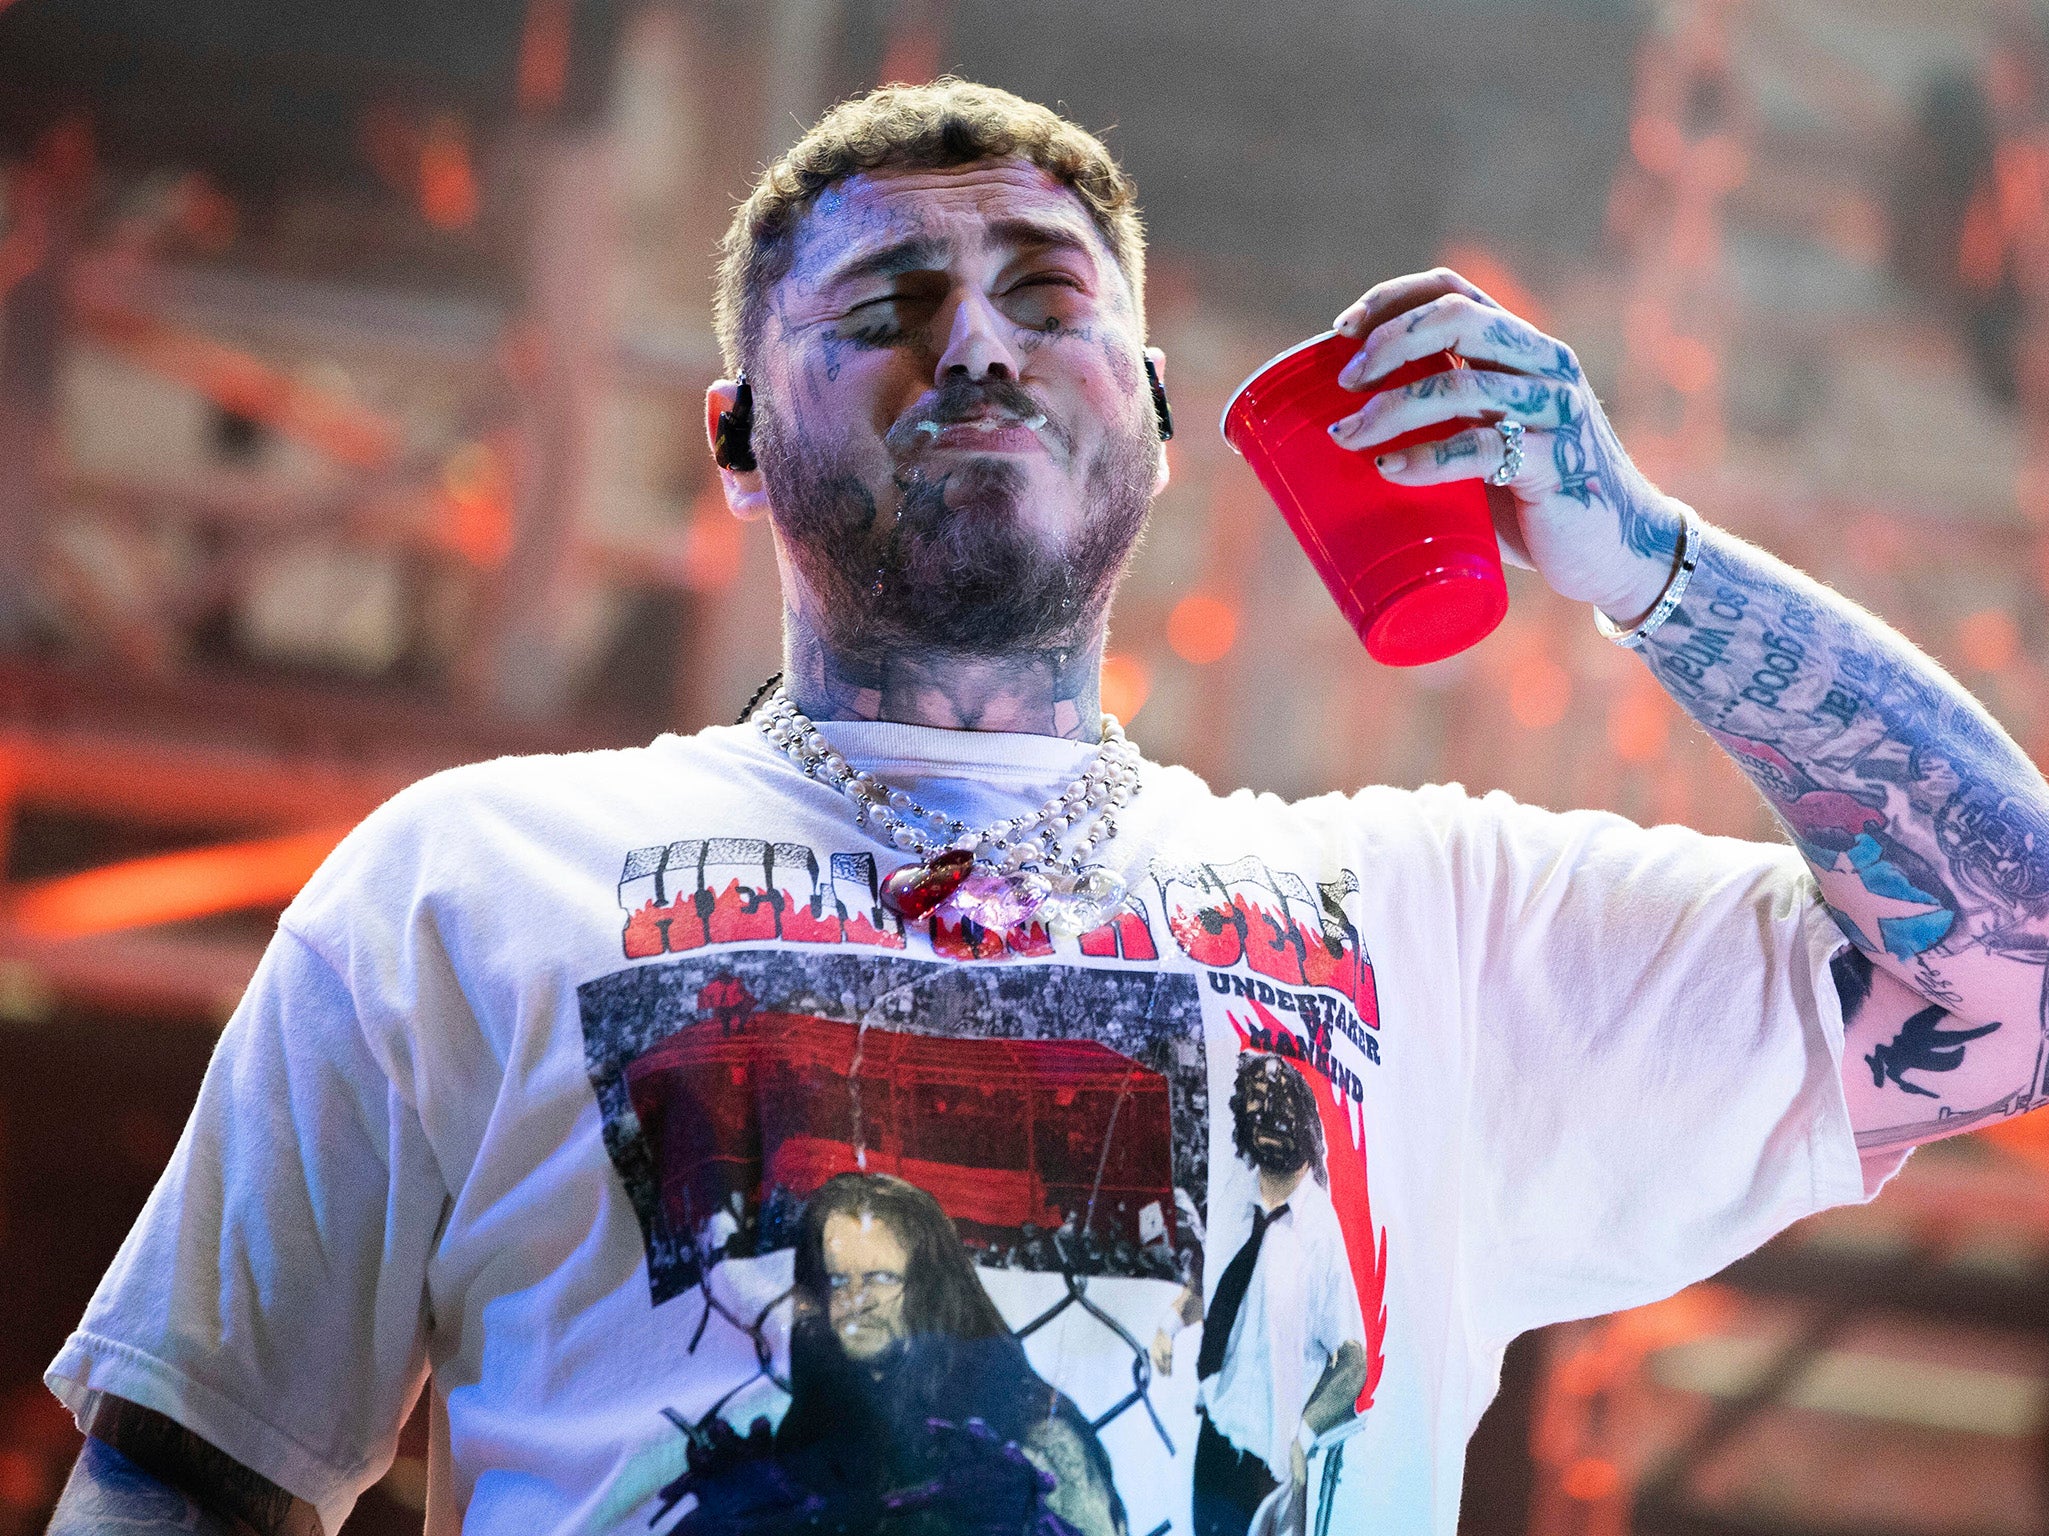 Post Malone headlines Day 2 at Reading Festival